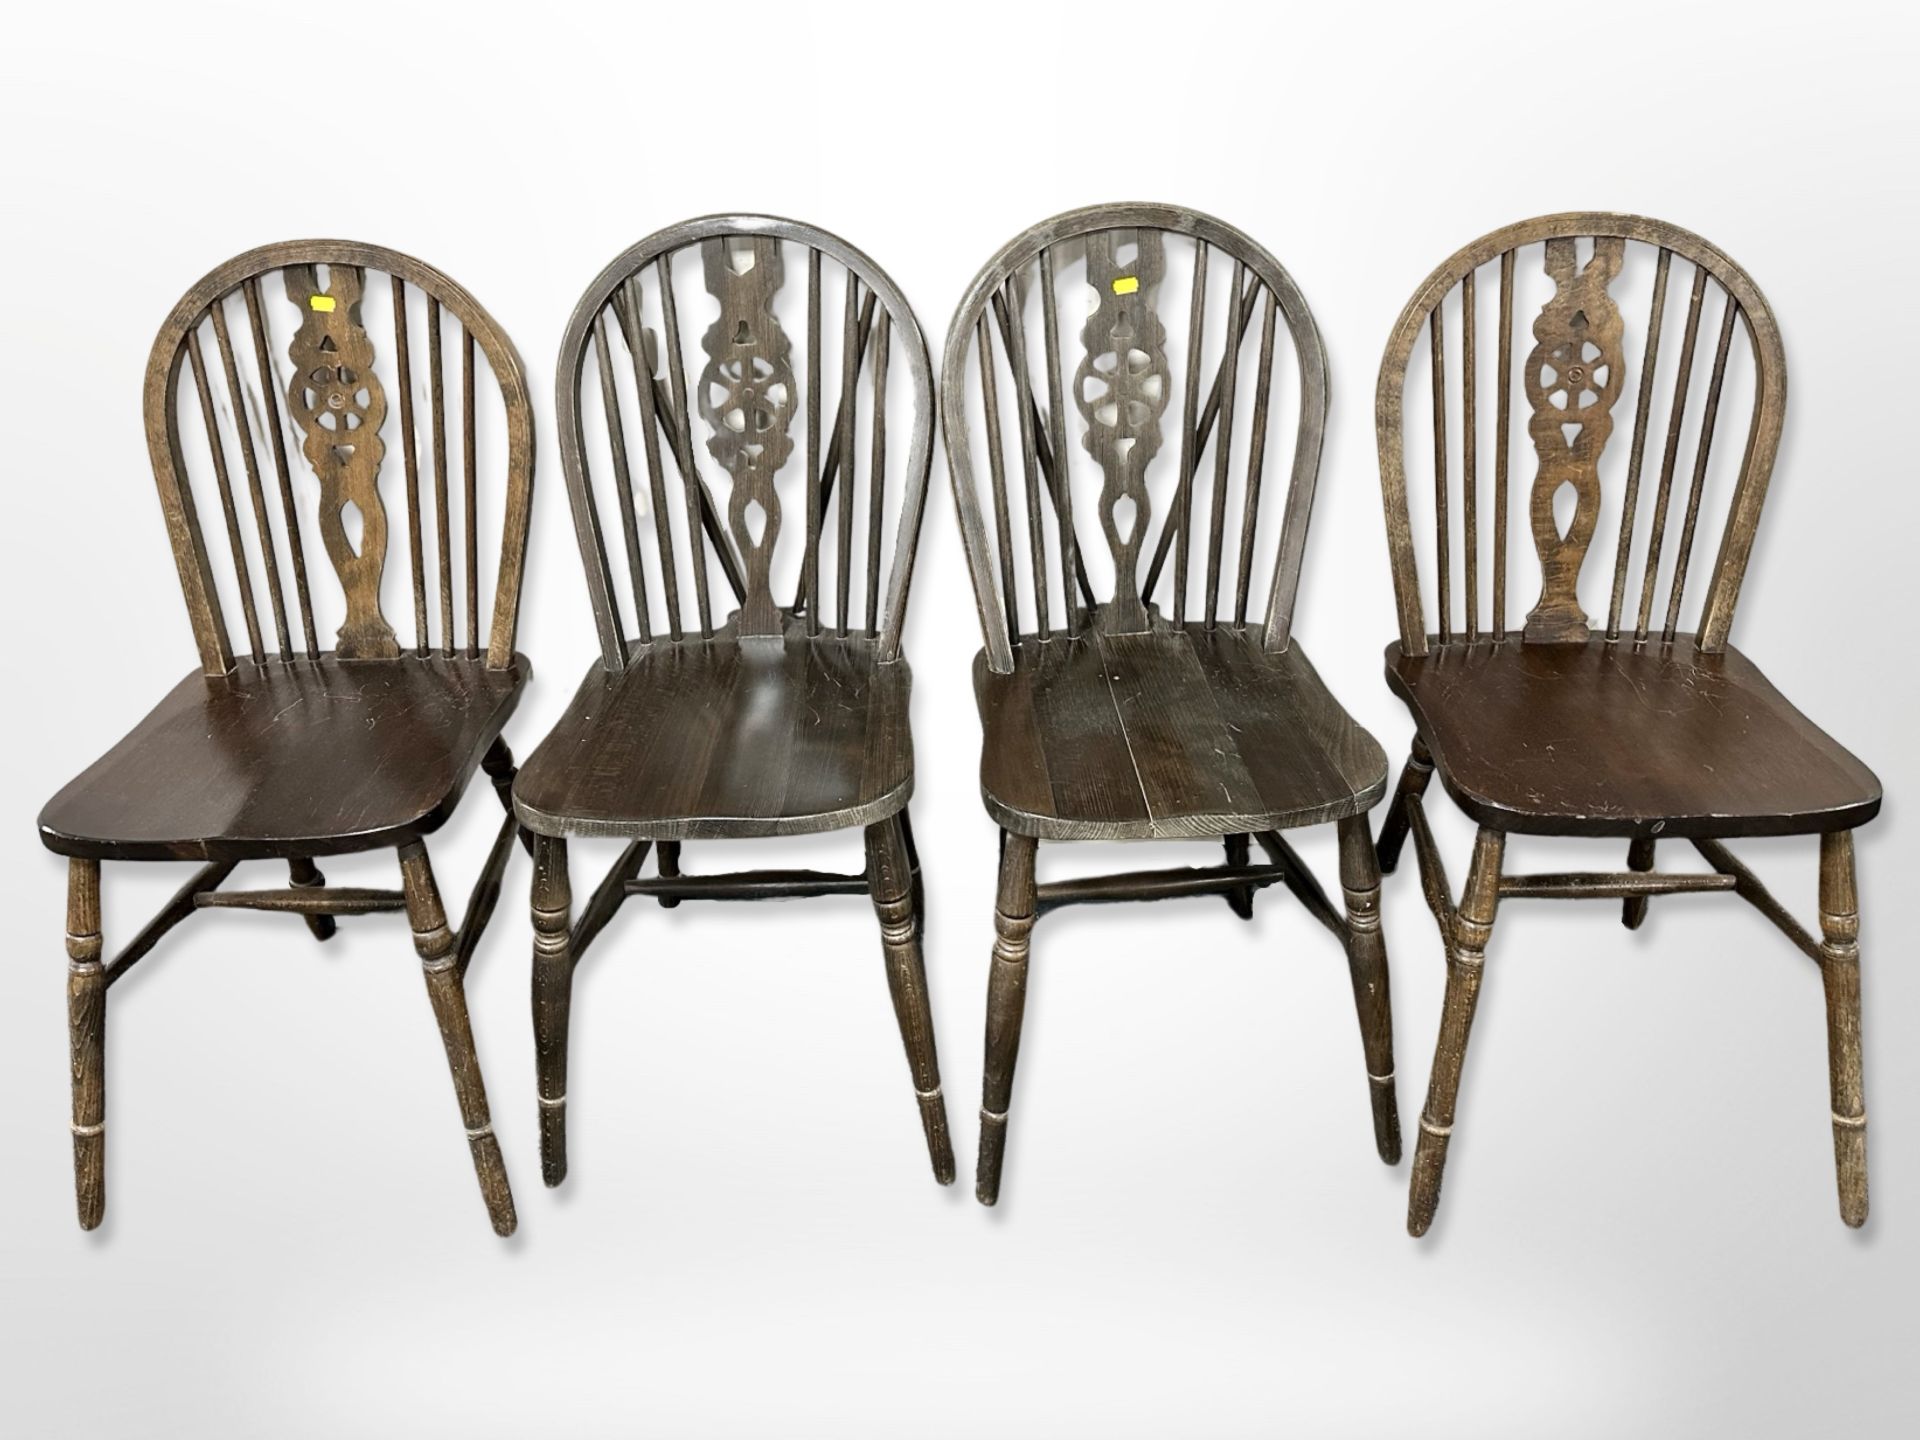 Two pairs of oak wheel back dining chairs